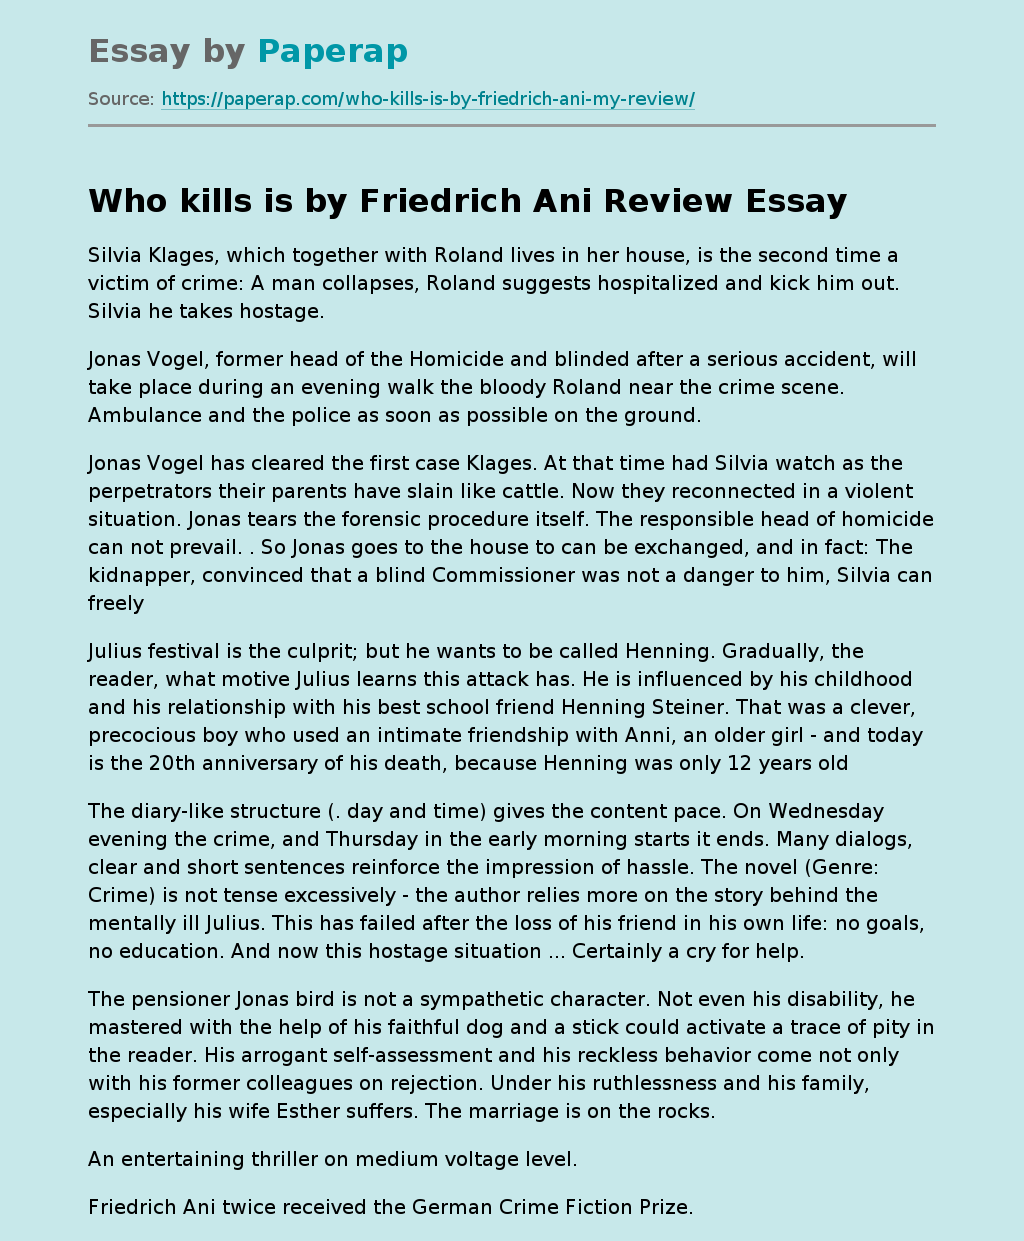 Who kills is by Friedrich Ani Review